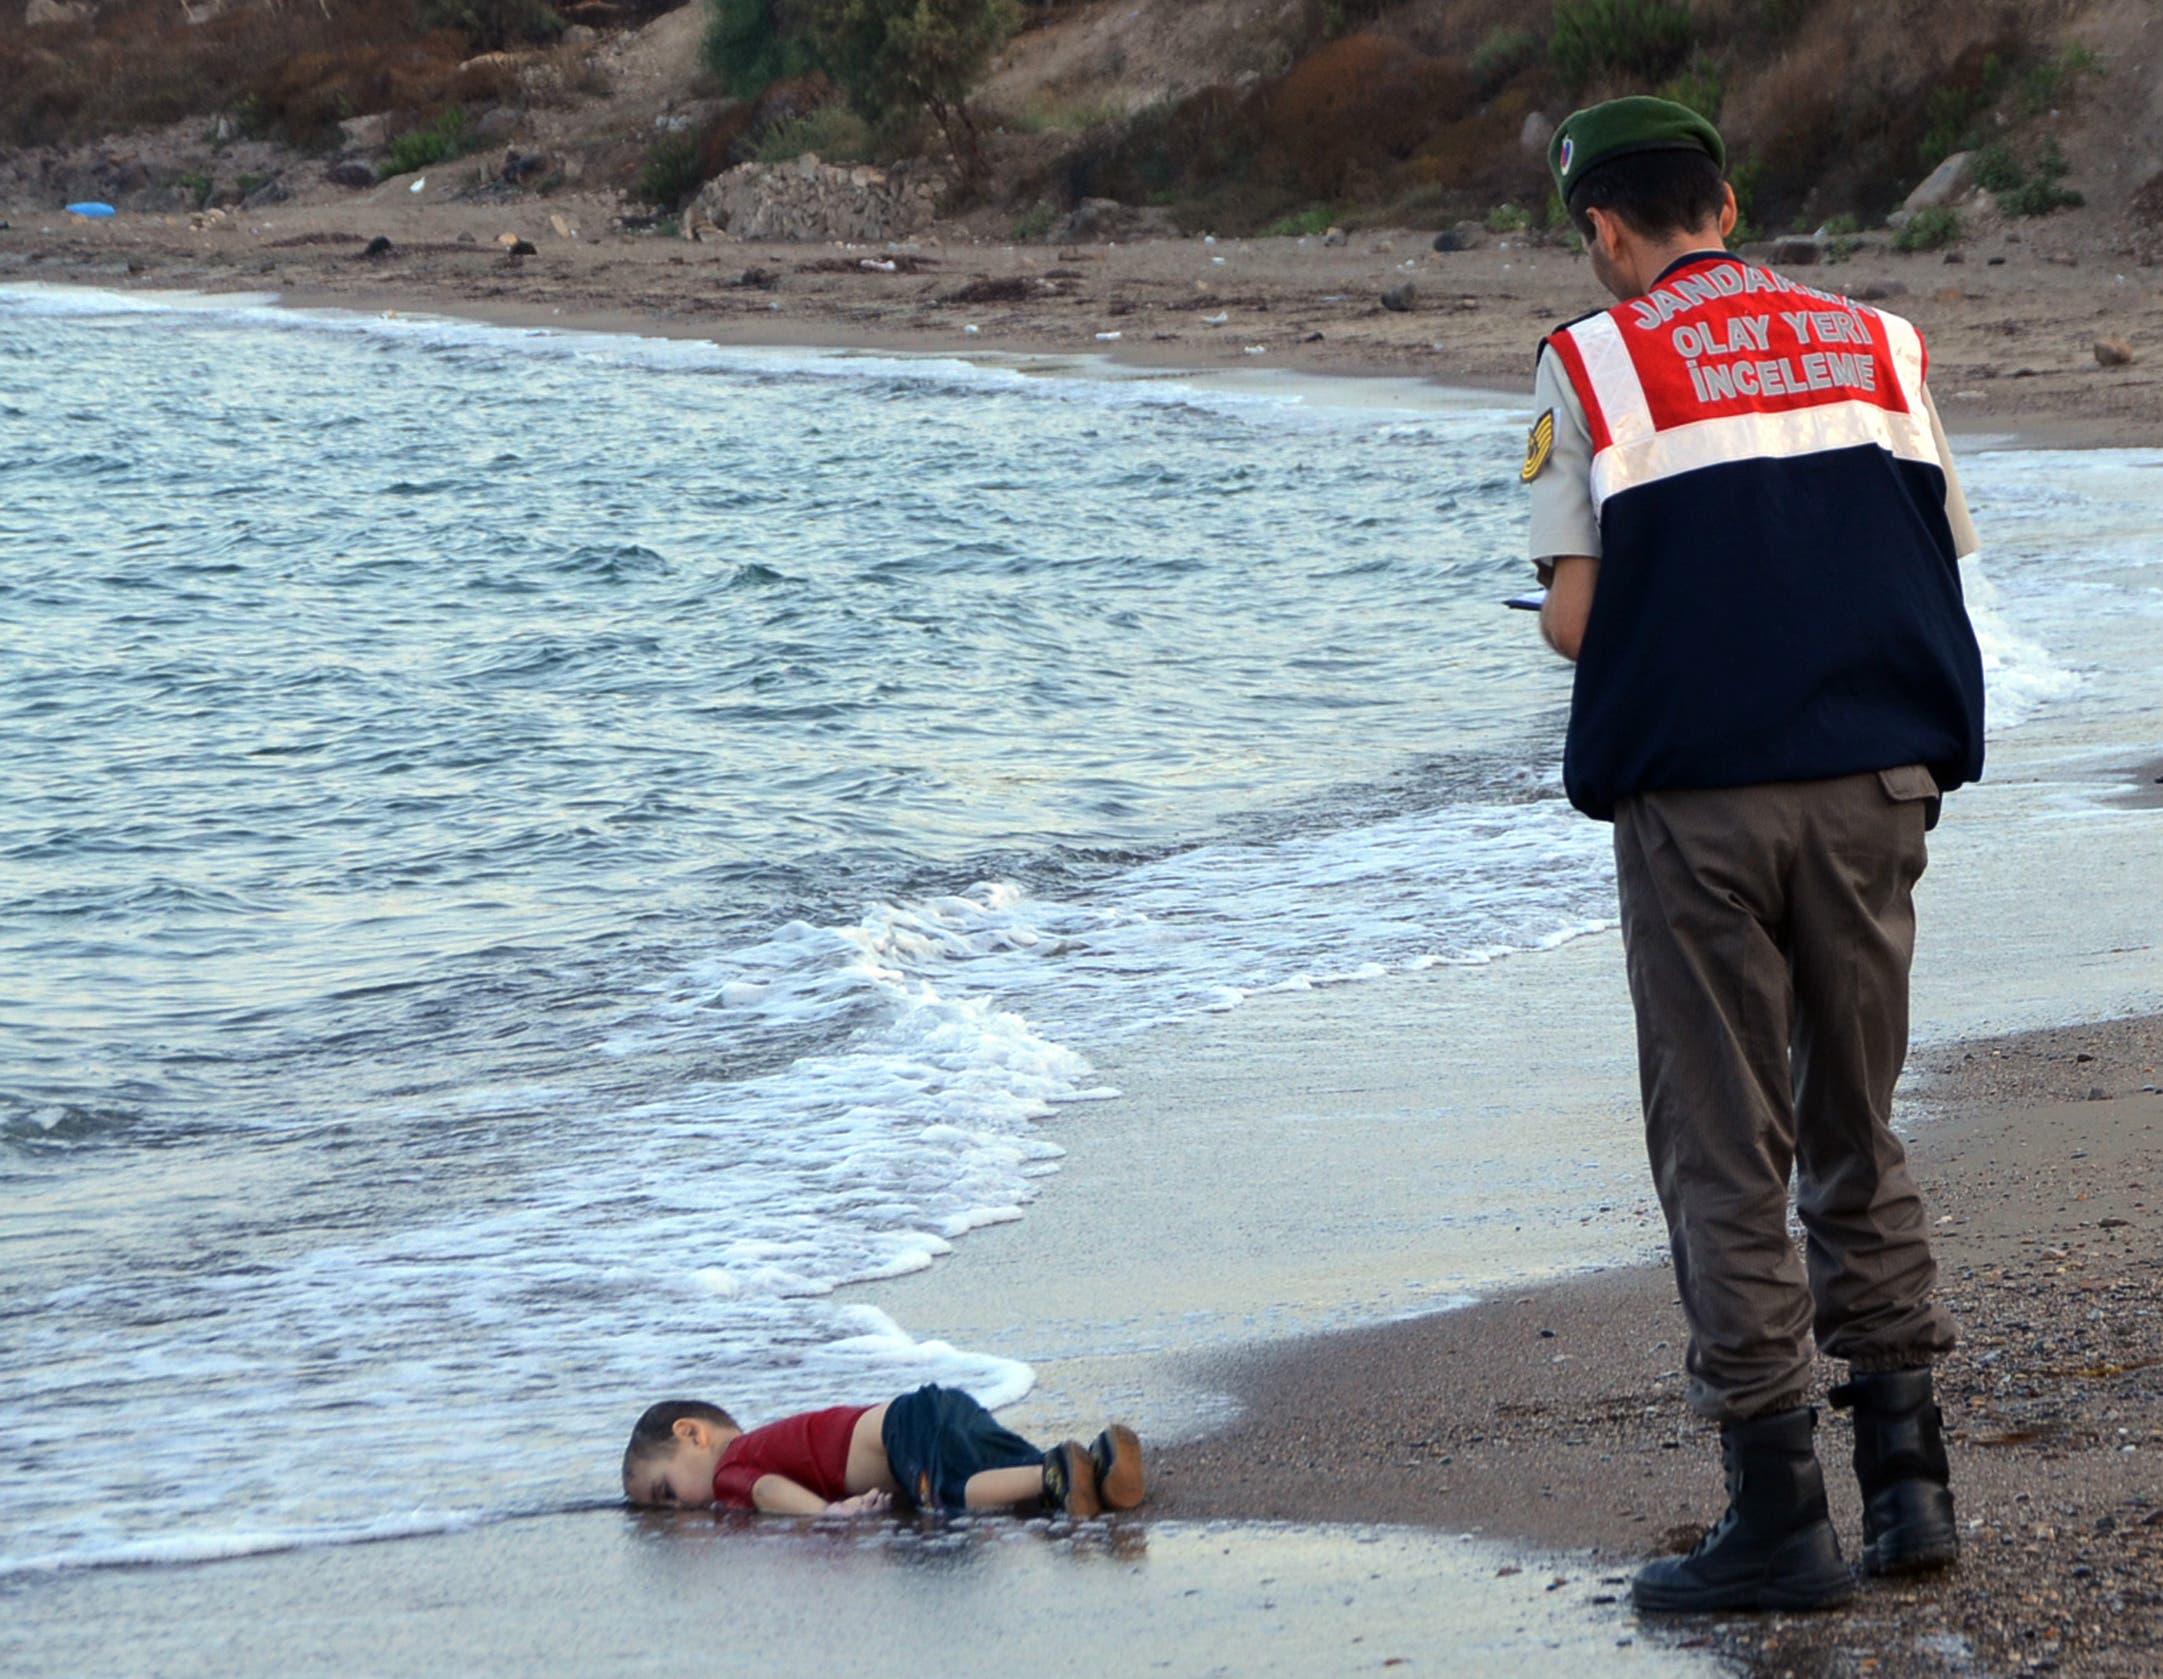 A paramilitary police officer investigates the scene before carrying the lifeless body of Aylan Kurdi, 3, AP